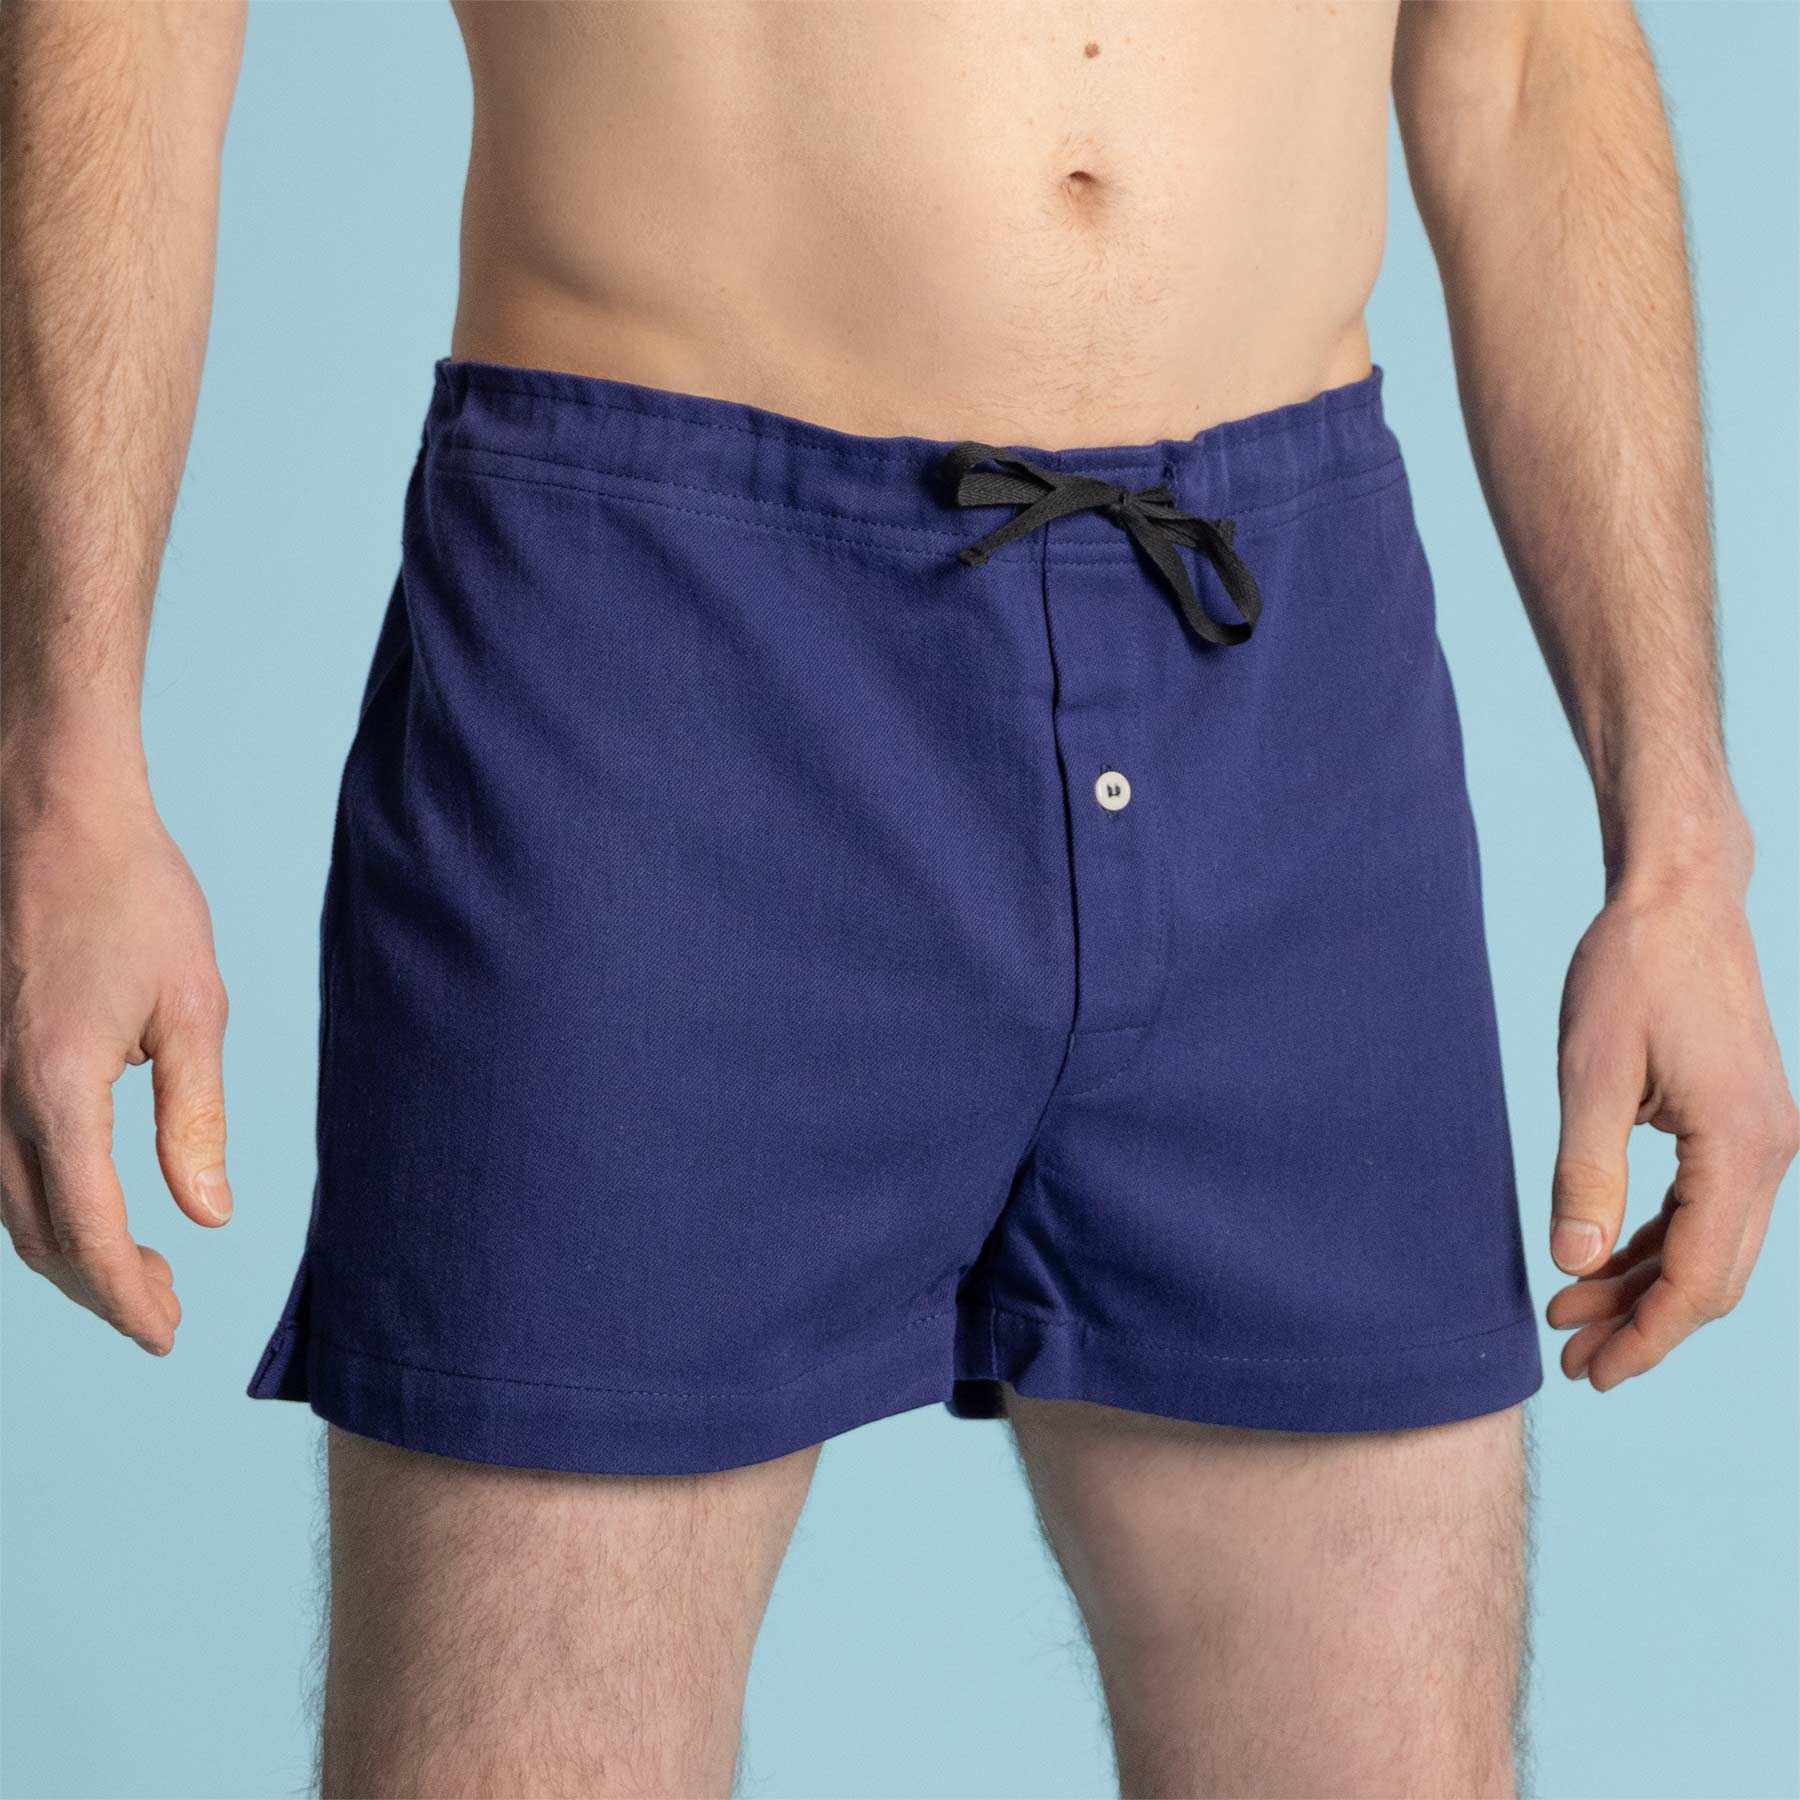 Men's Organic Cotton Boxers with Covered Elastic